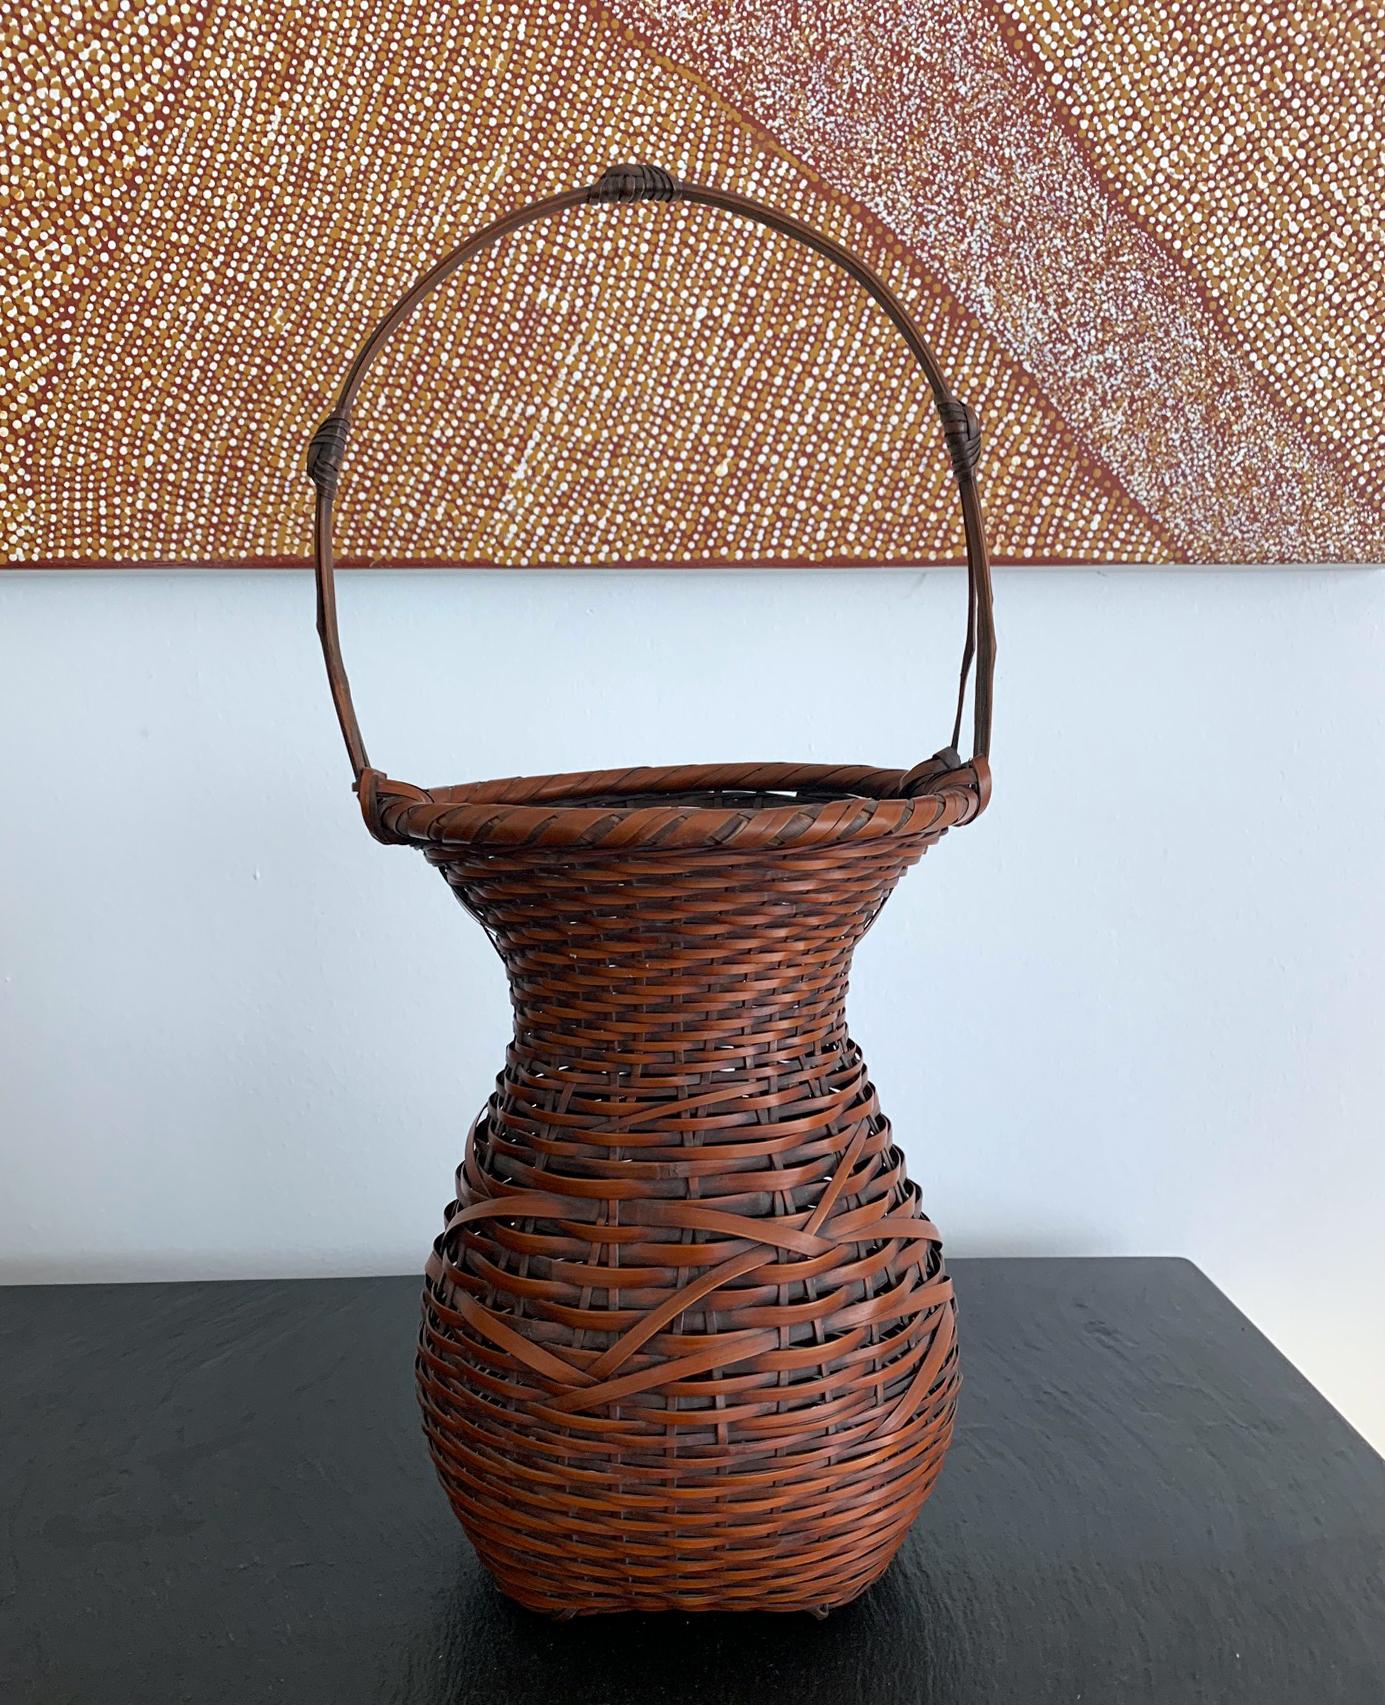 A handwoven bamboo basket used as an ikebana by Japanese Bamboo artist Yufu Shohaku (b. 1941-). The basket was constructed using different sizes of pine needle plaiting intercepted with irregular plaiting. The feet were finished in a subtle looped